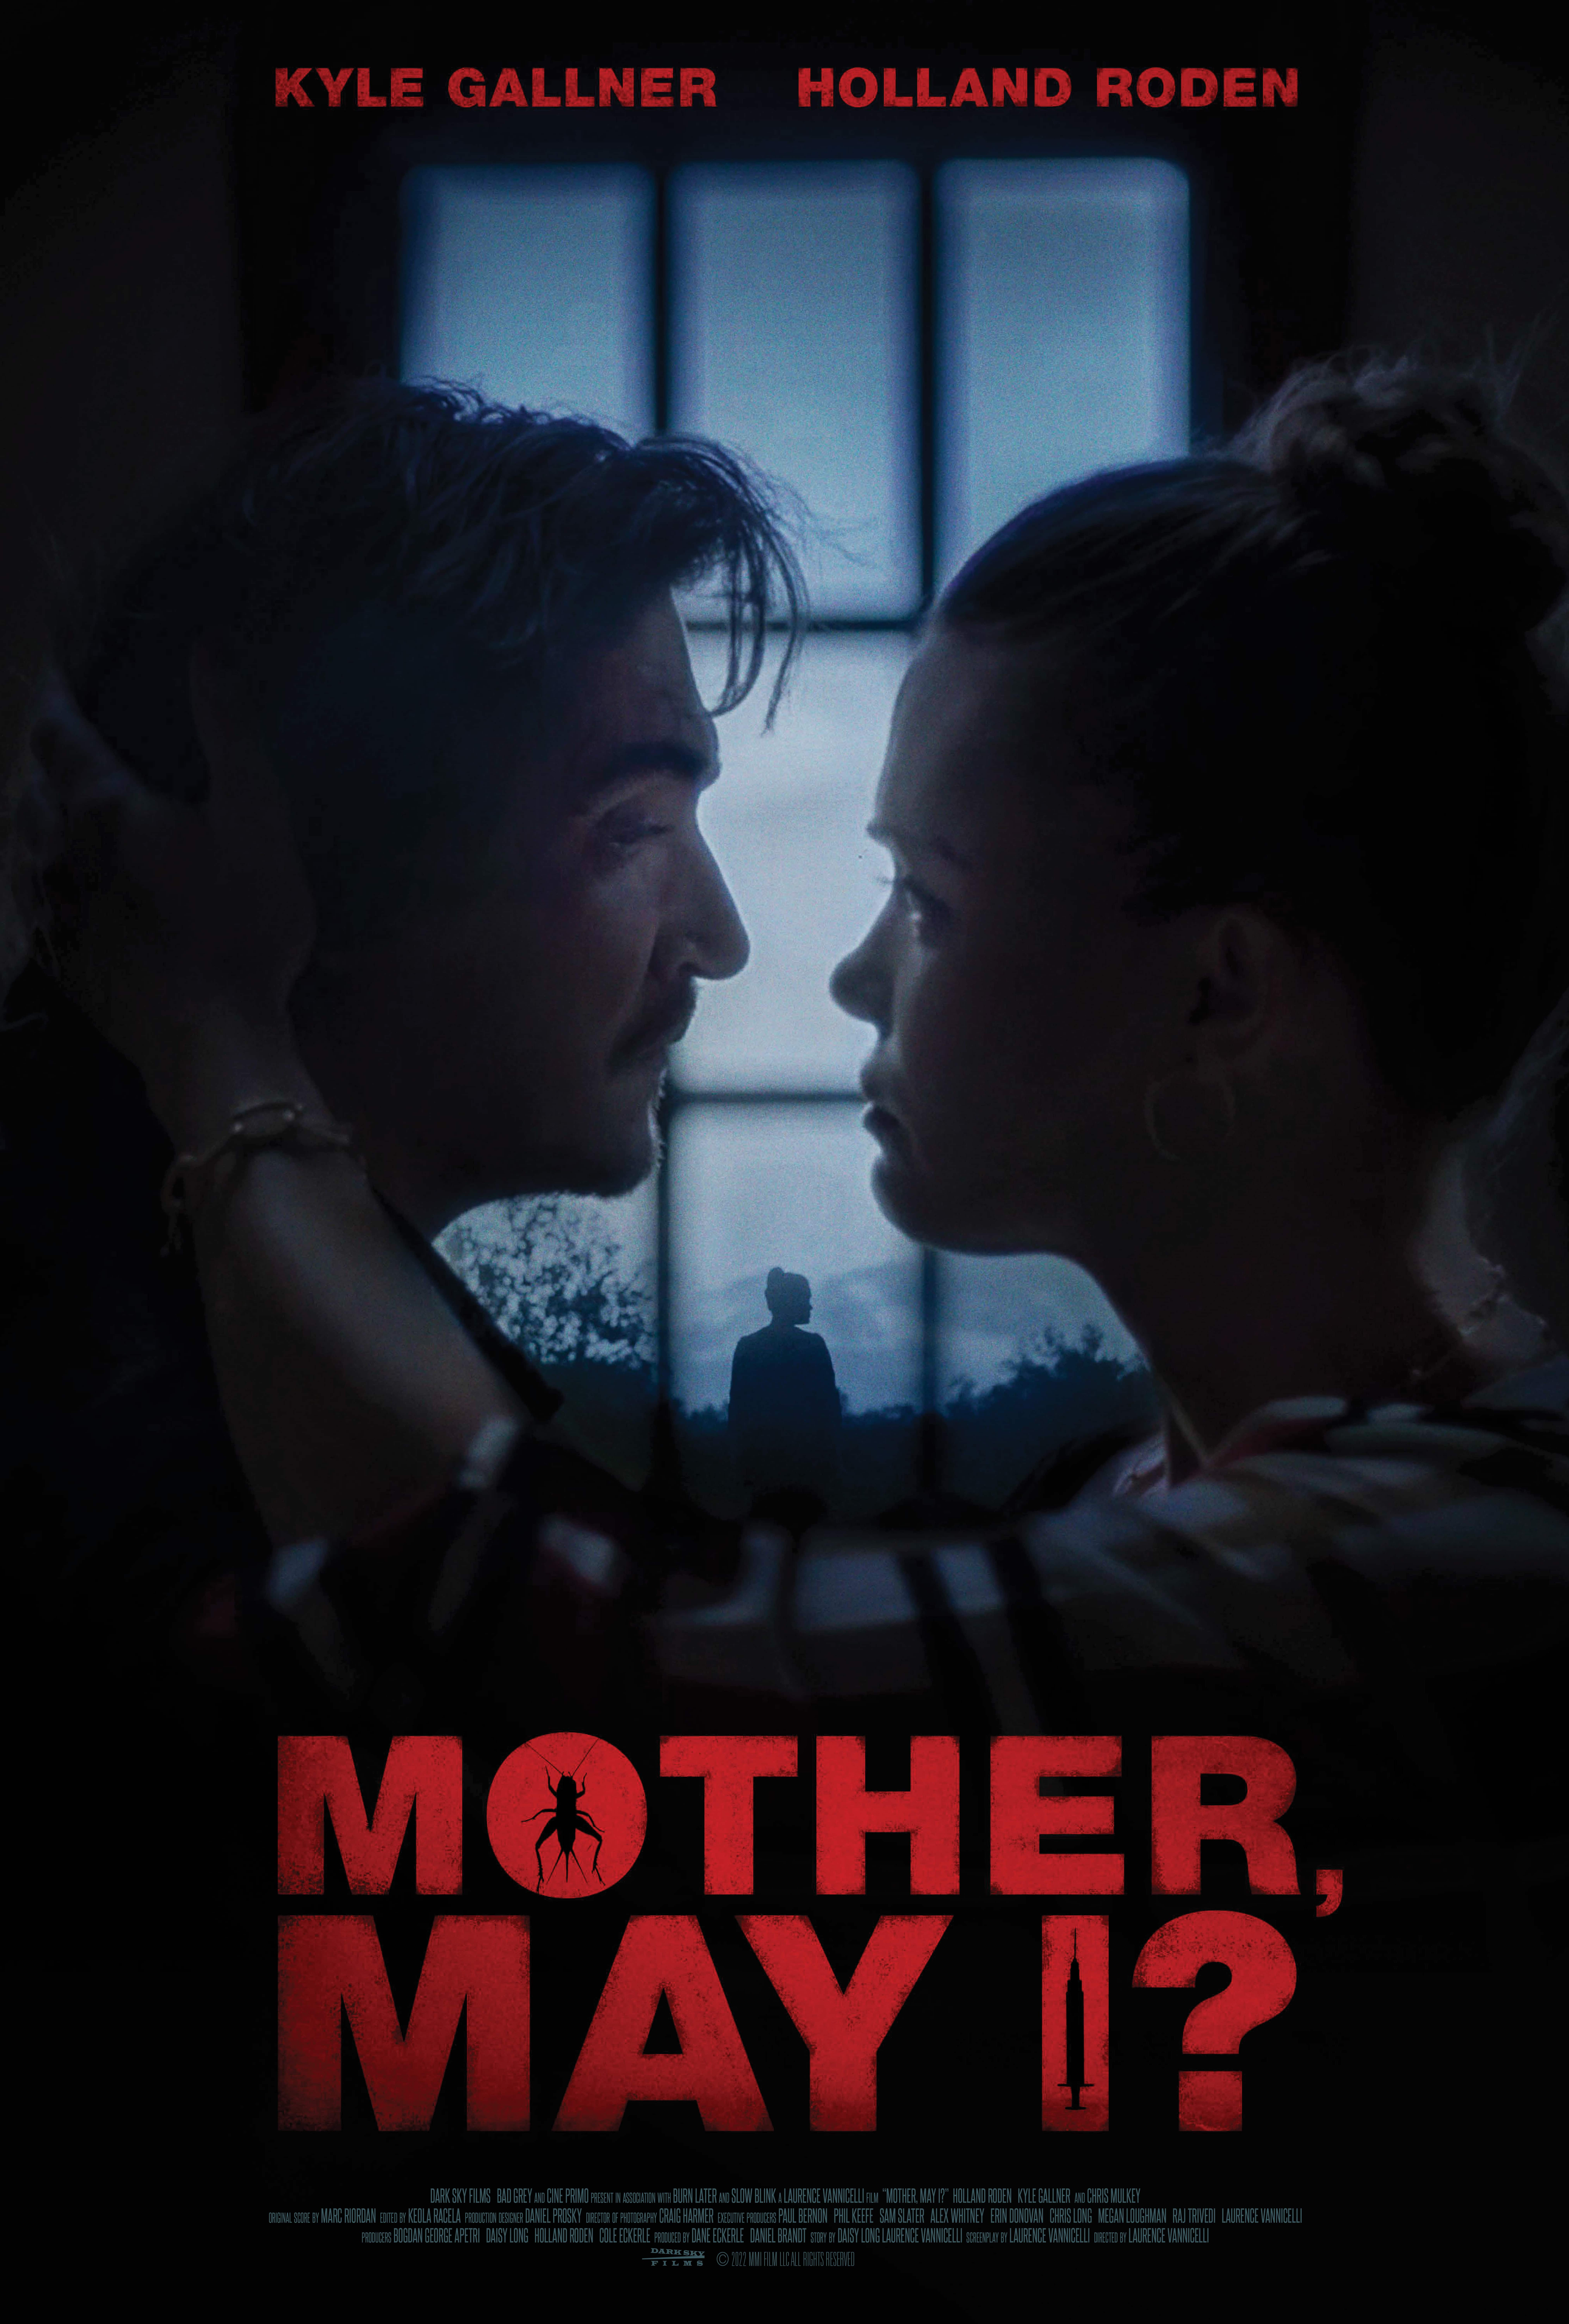 Mother, May I? - A Spine-Chilling Thriller Arriving Soon 27